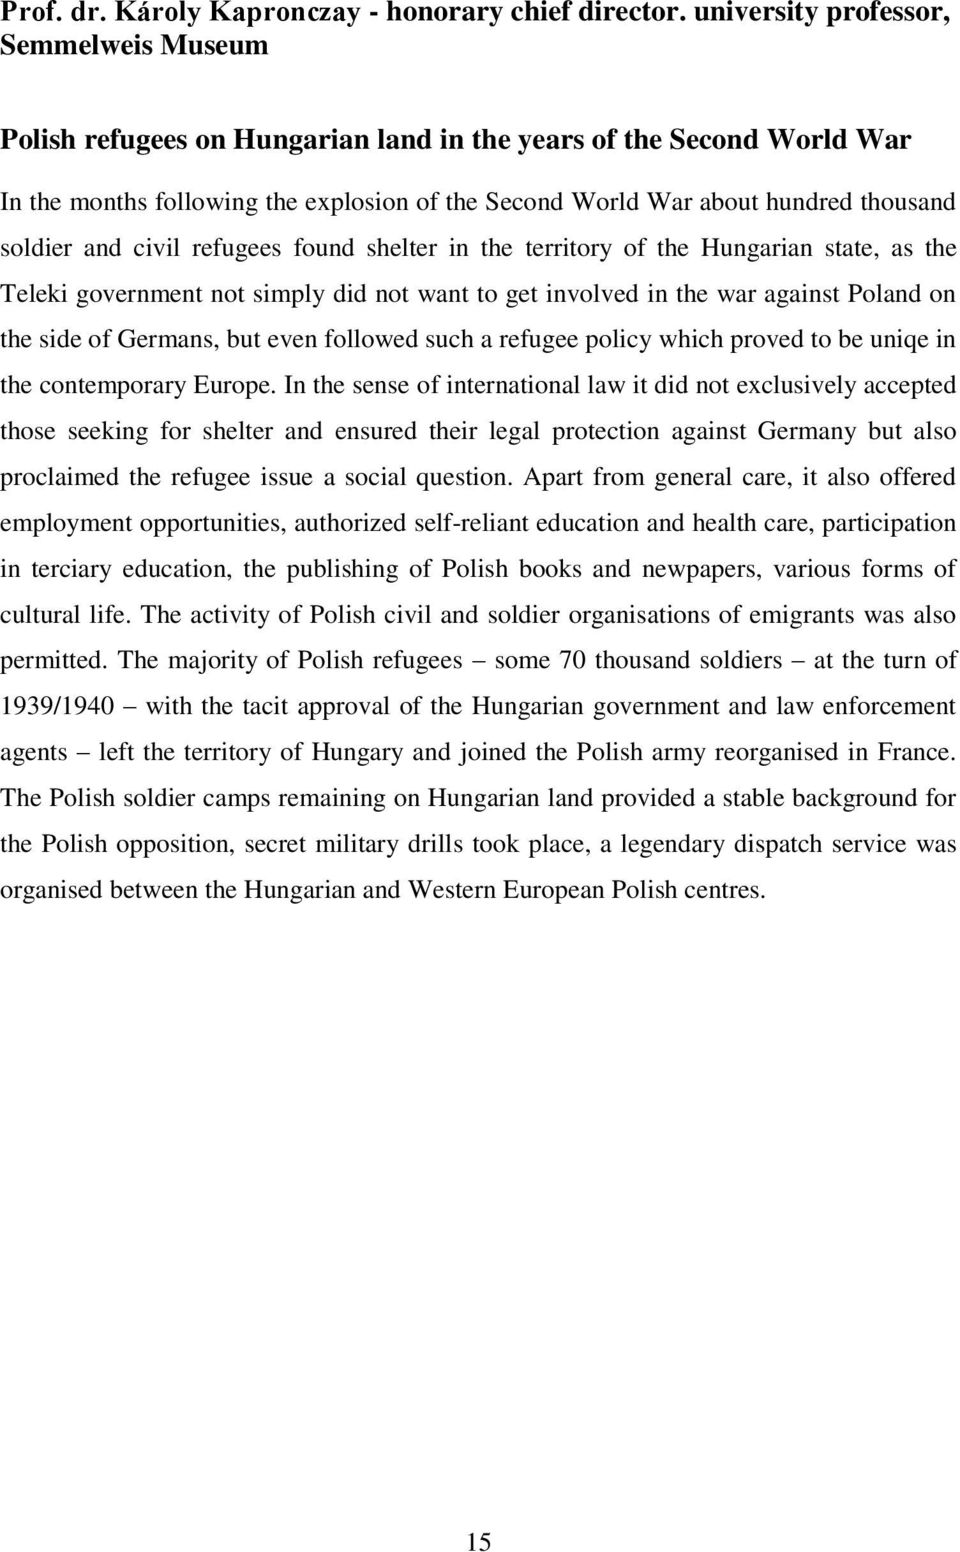 soldier and civil refugees found shelter in the territory of the Hungarian state, as the Teleki government not simply did not want to get involved in the war against Poland on the side of Germans,